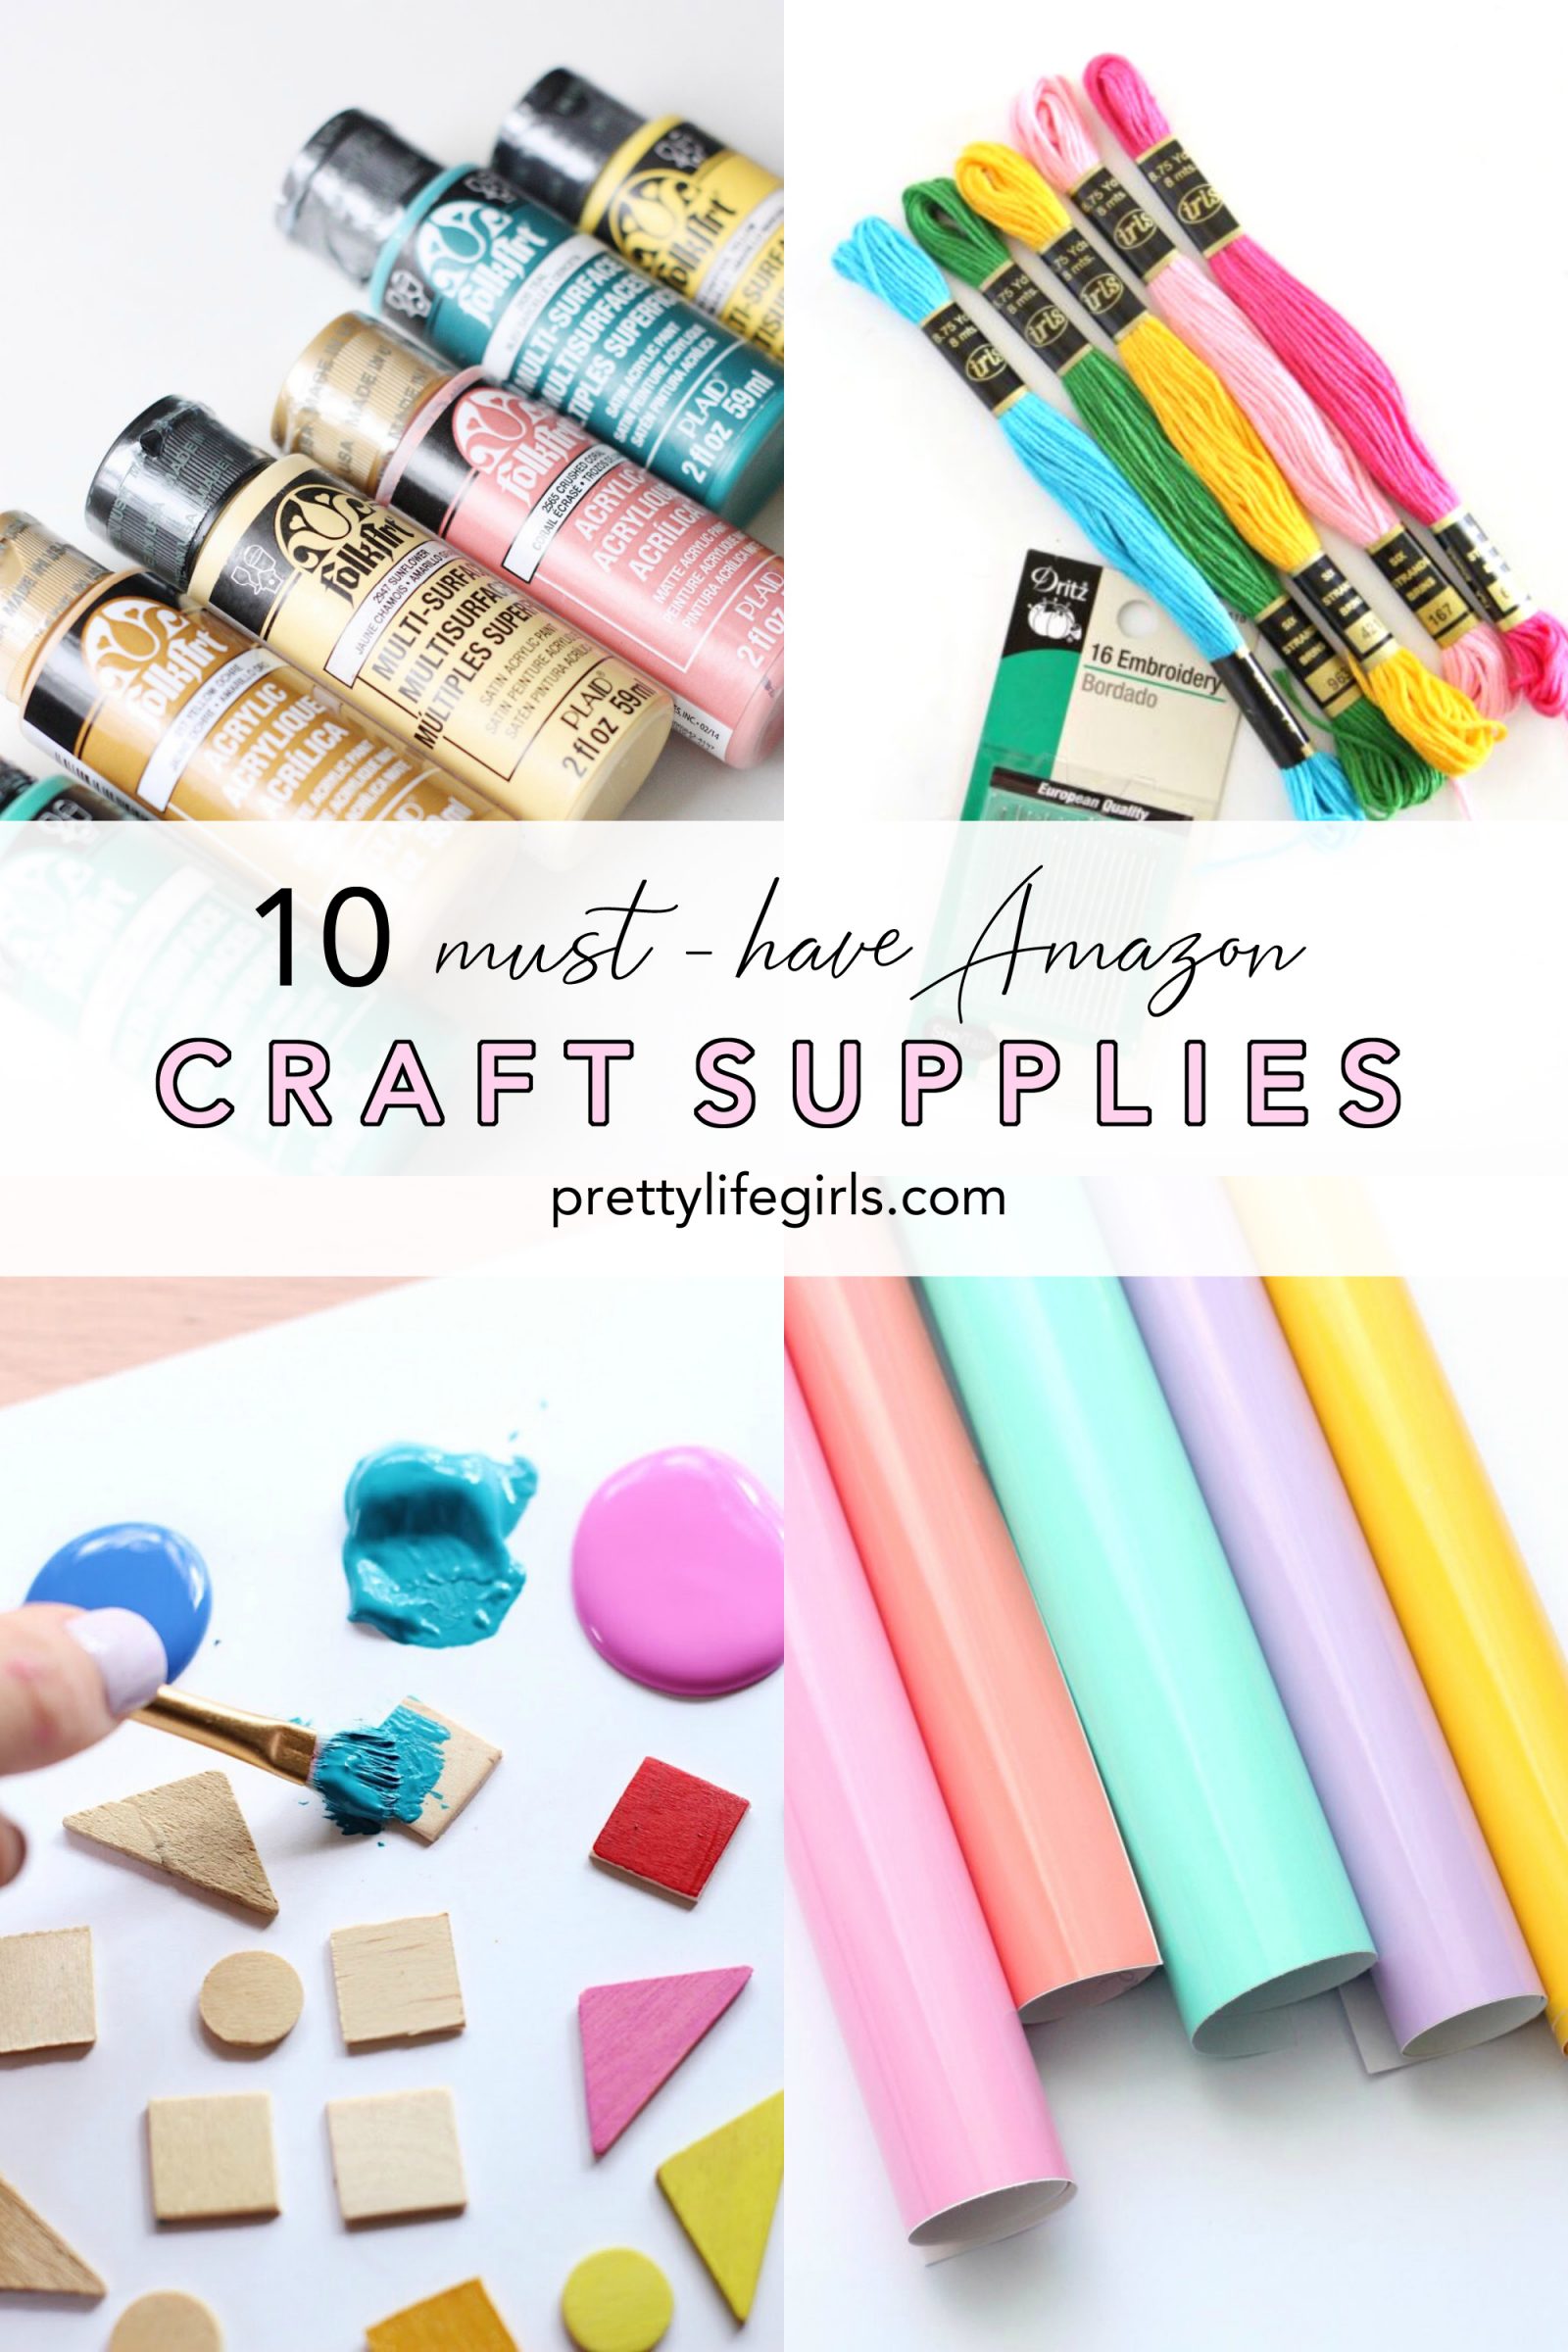 Top 10 Amazon Craft Supplies You Need in Your Craft Room + a tutorial featured by Top US Craft Blog + The Pretty Life Girls